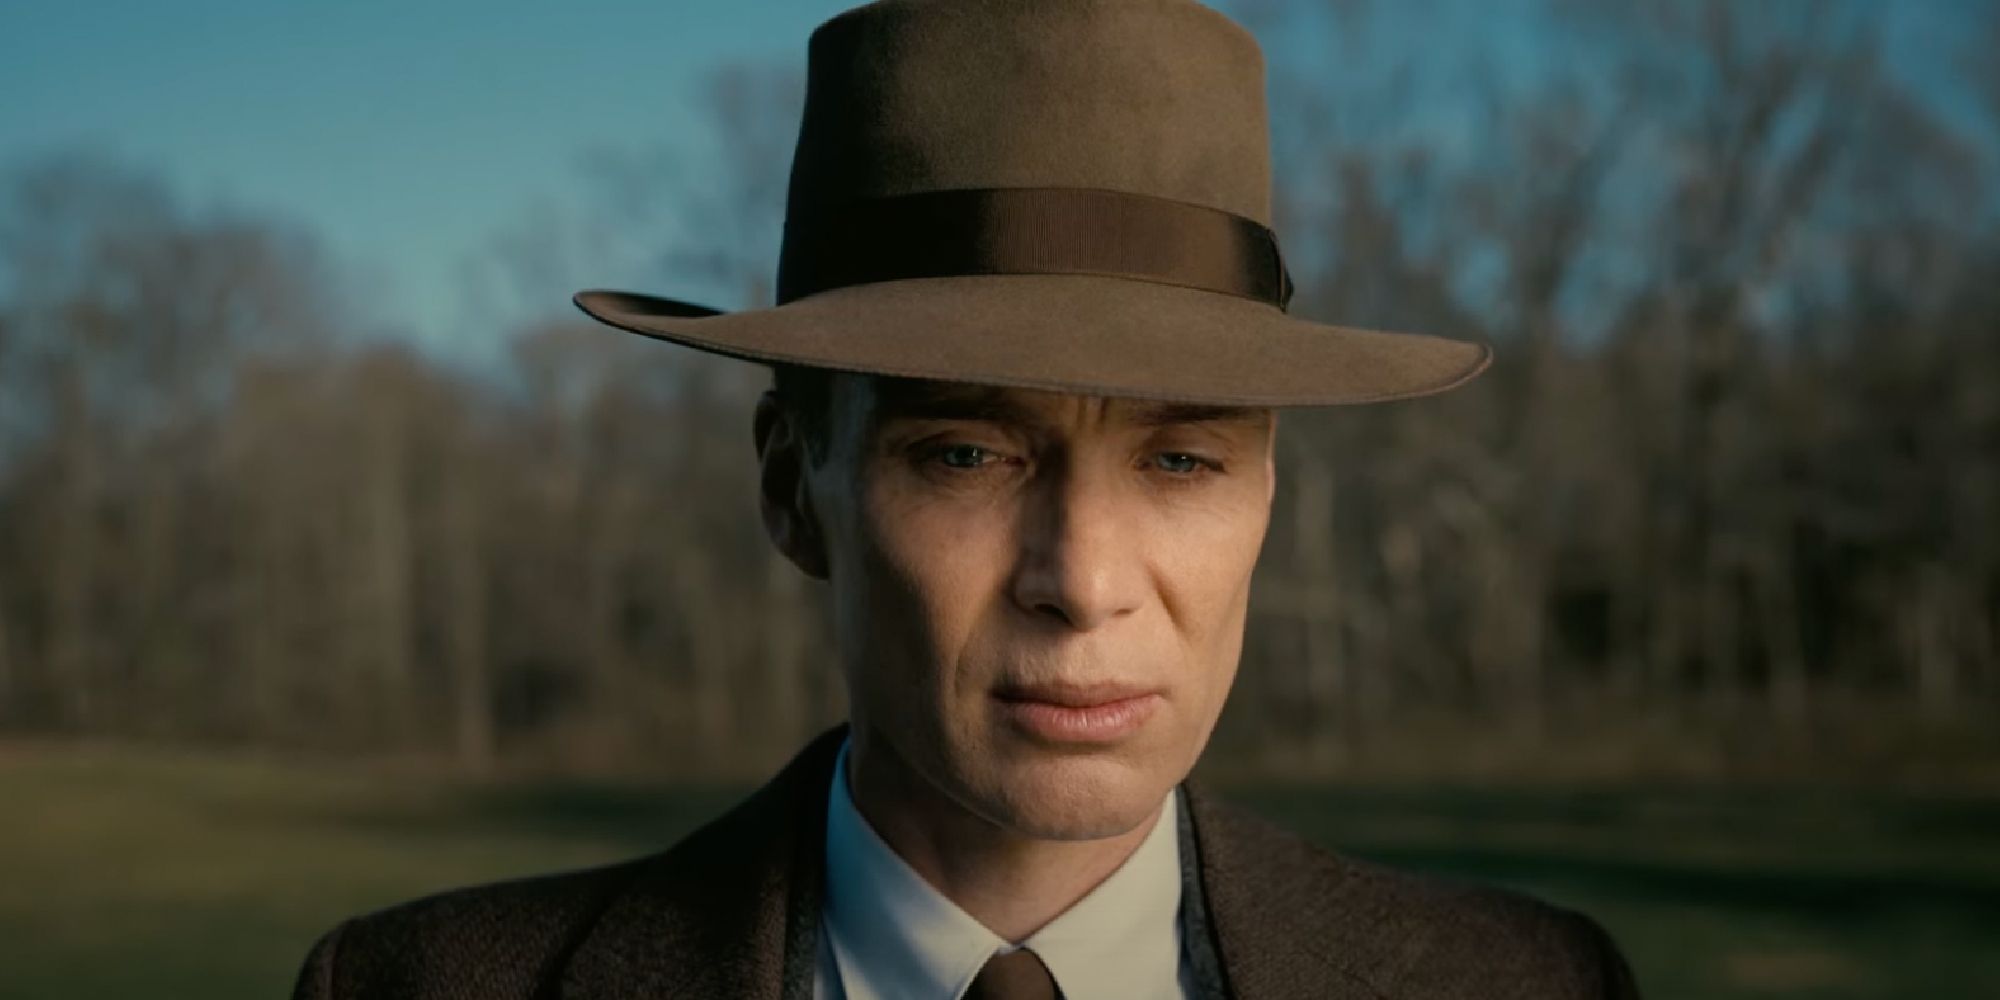 Cillian Murphy in Color at Oppenheimer